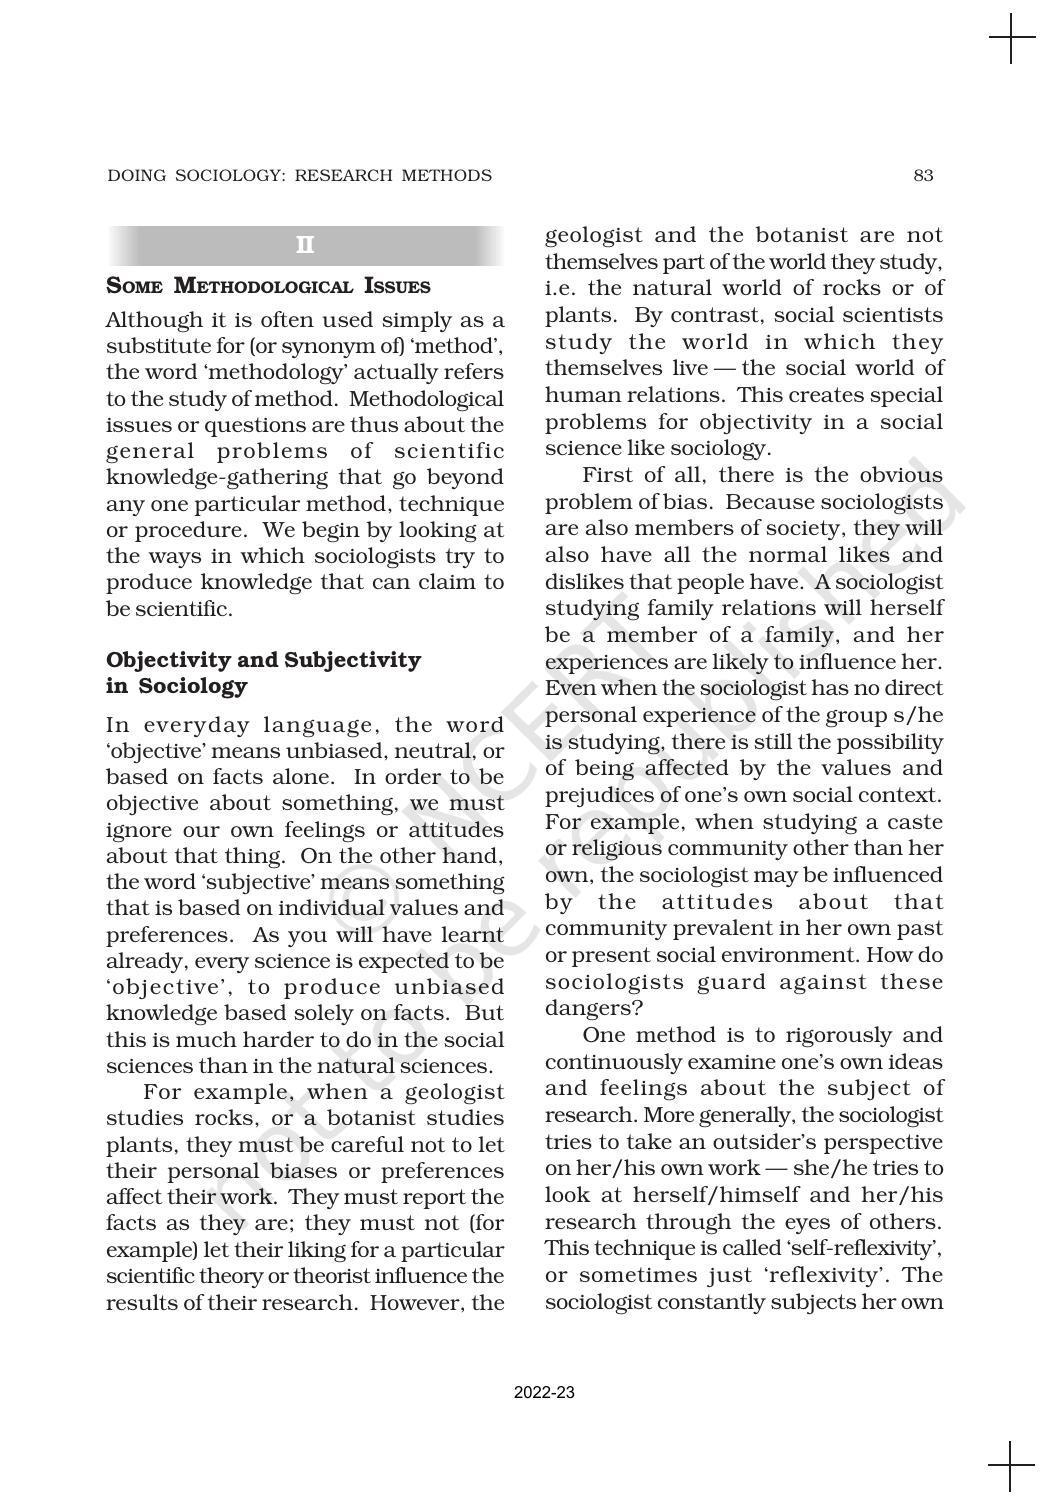 NCERT Book for Class 11 Sociology (Part-I) Chapter 5 Doing Sociology: Research Methods - Page 2